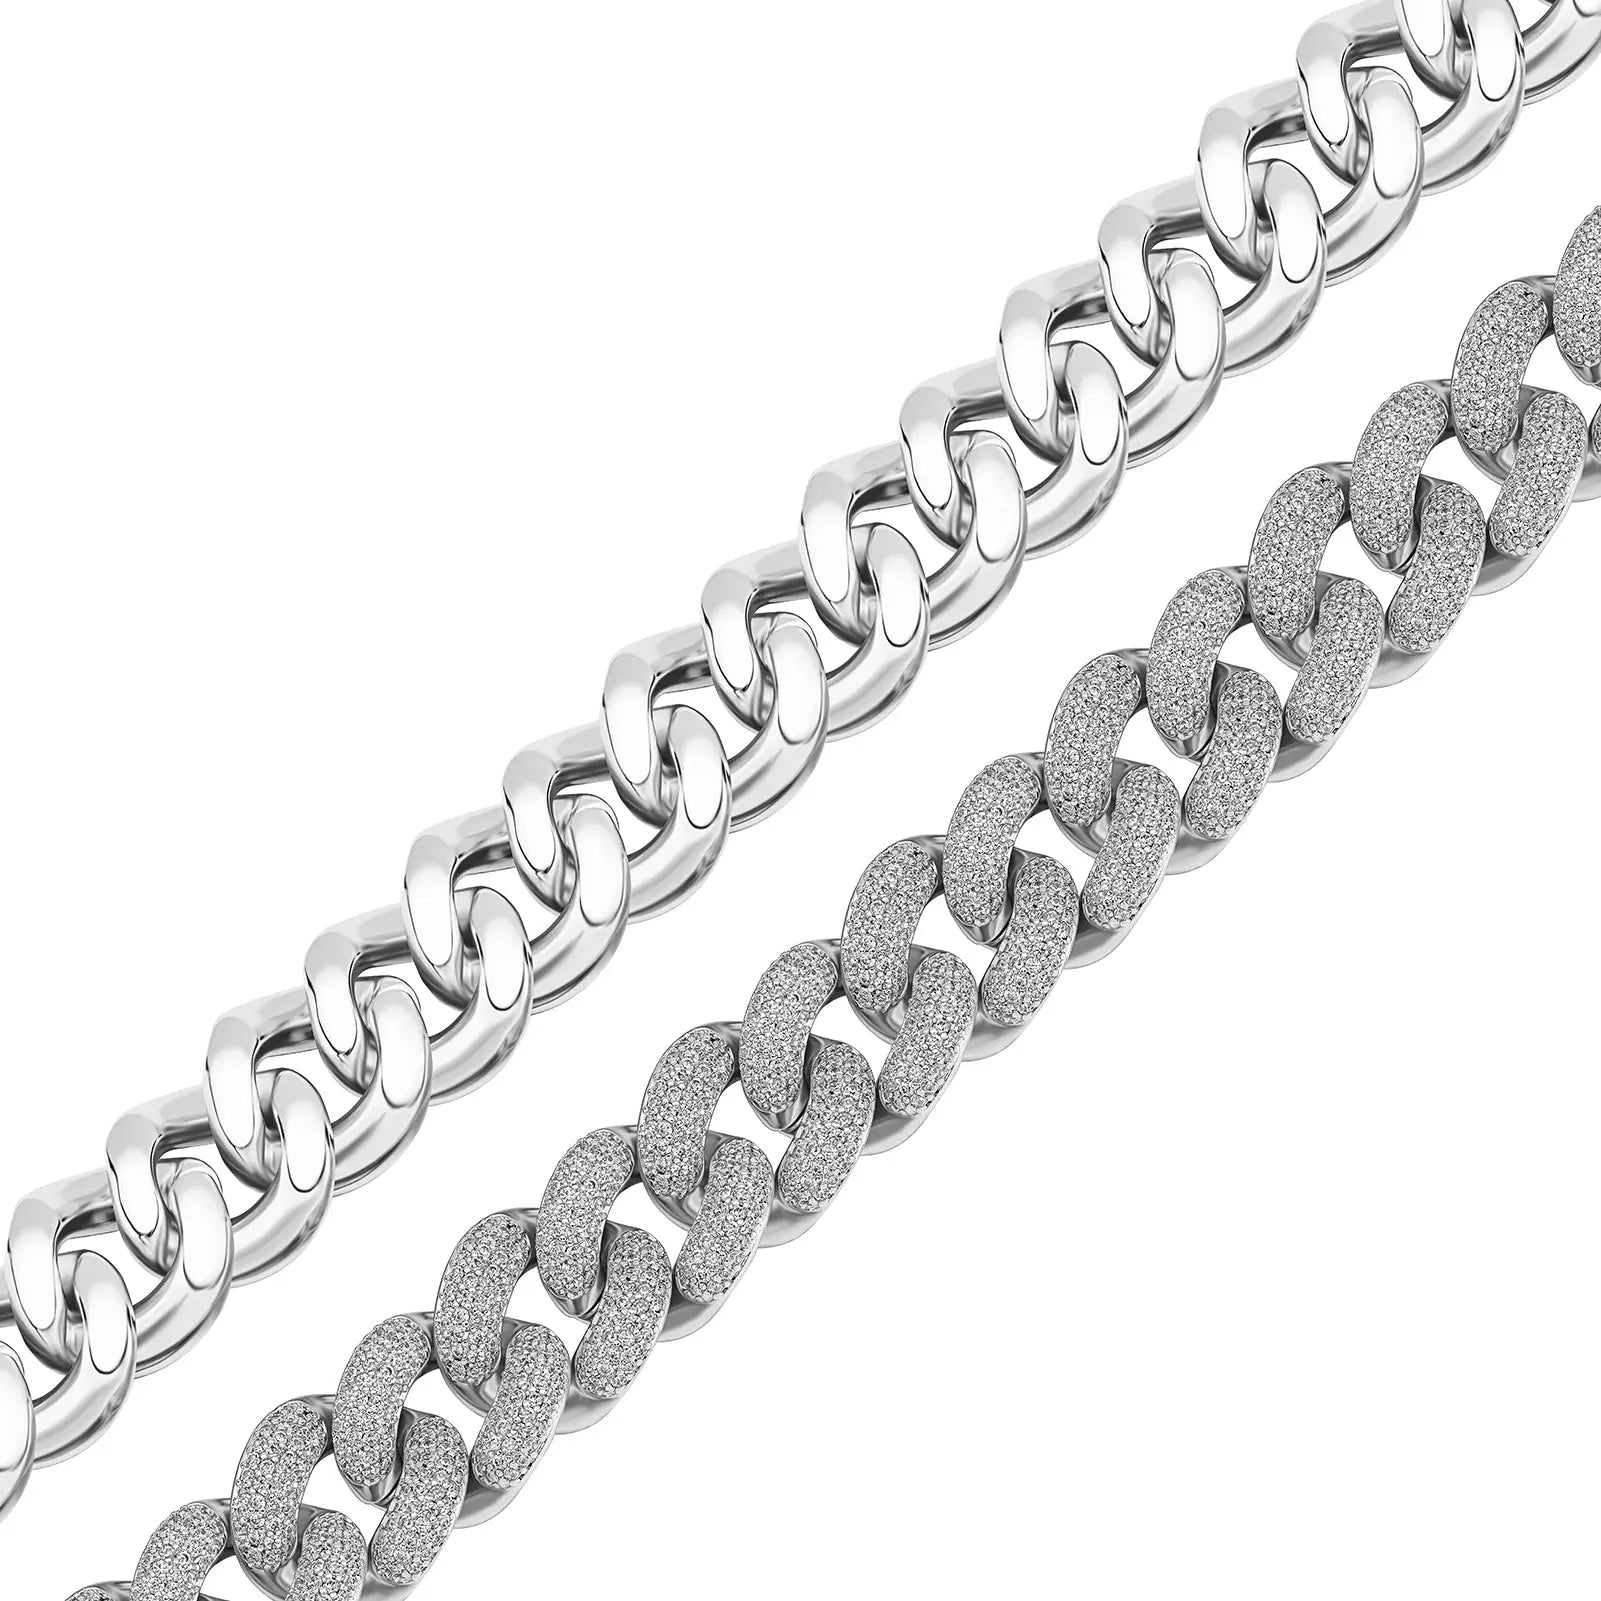 20mm Iced Cuban Link Chain in White Gold   The Icetruck